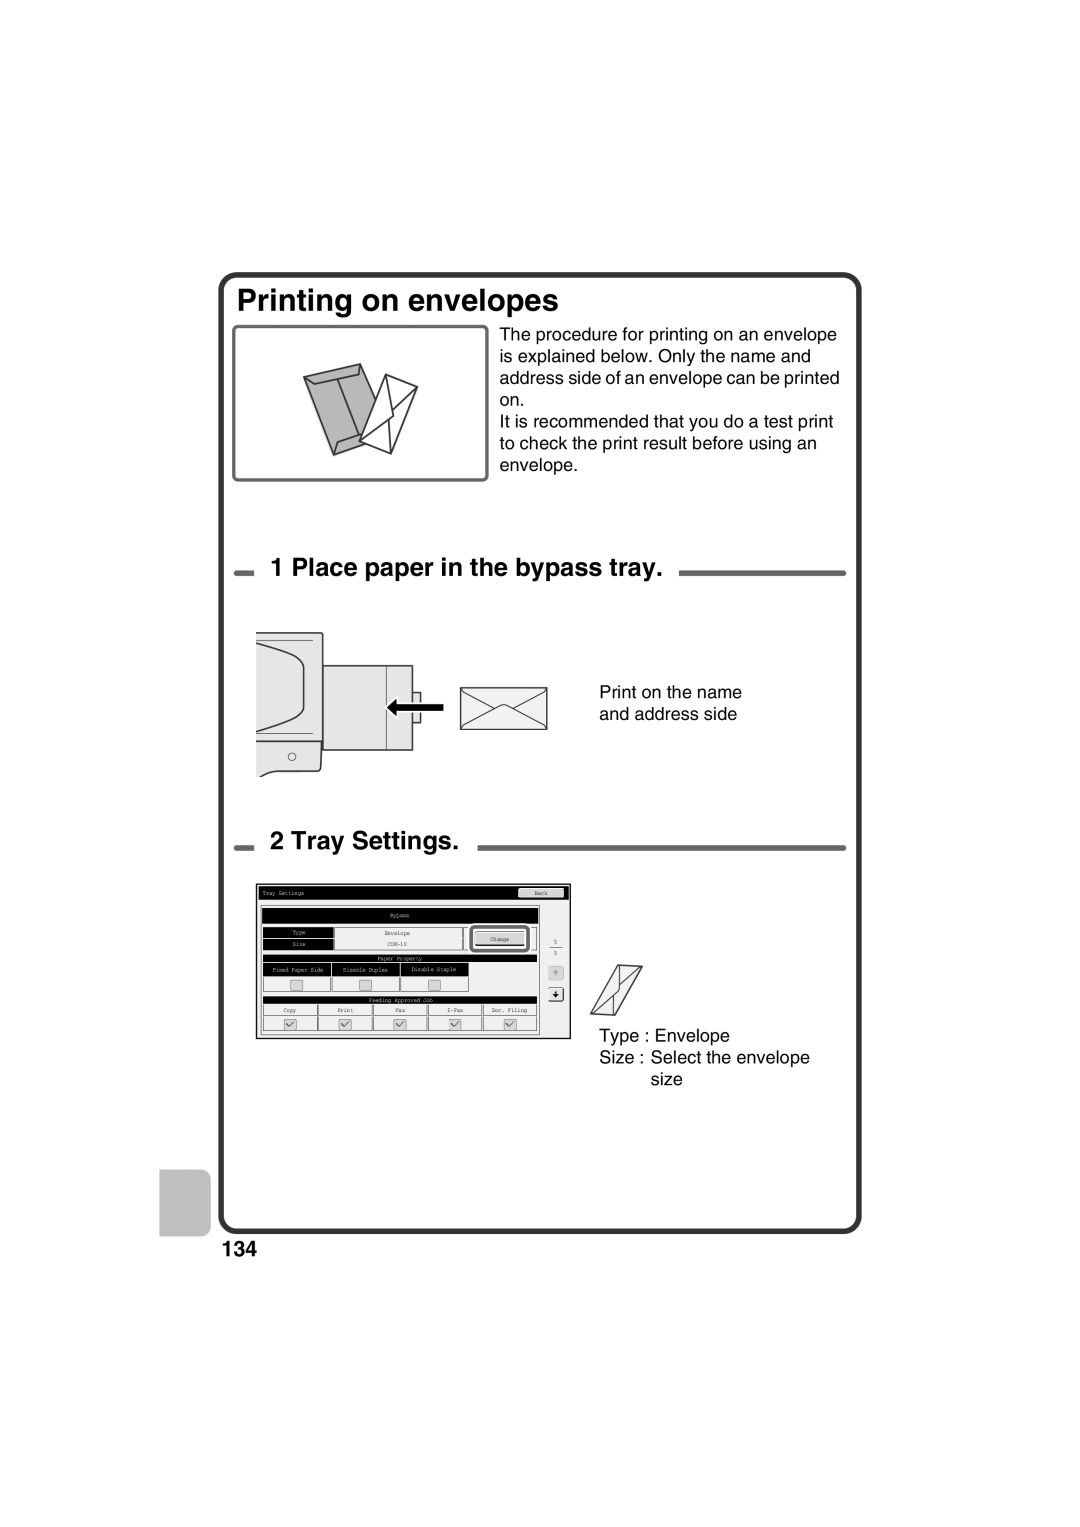 Sharp MX-B401, TINSE4377FCZZ quick start Printing on envelopes, Place paper in the bypass tray, Tray Settings 